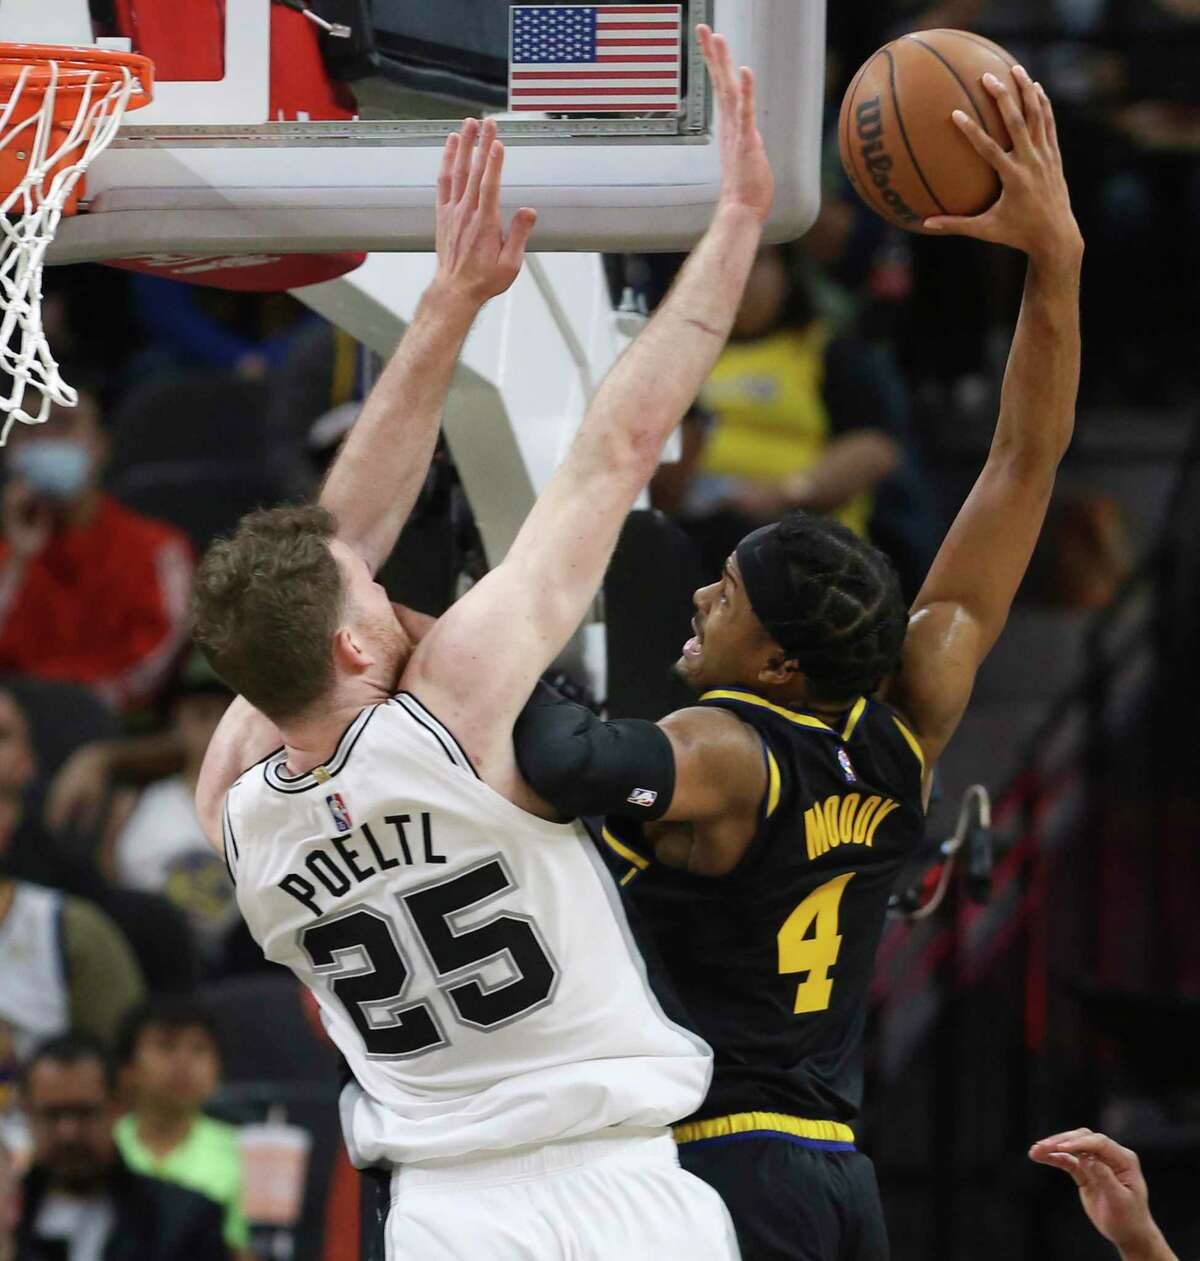 Spurs' Jakob Poeltl (25) defends a dunk attempt by Golden State Warriors' Moses Moody (04) during the first half of the game at the AT&T Center on Tuesday, Feb. 1, 2022.